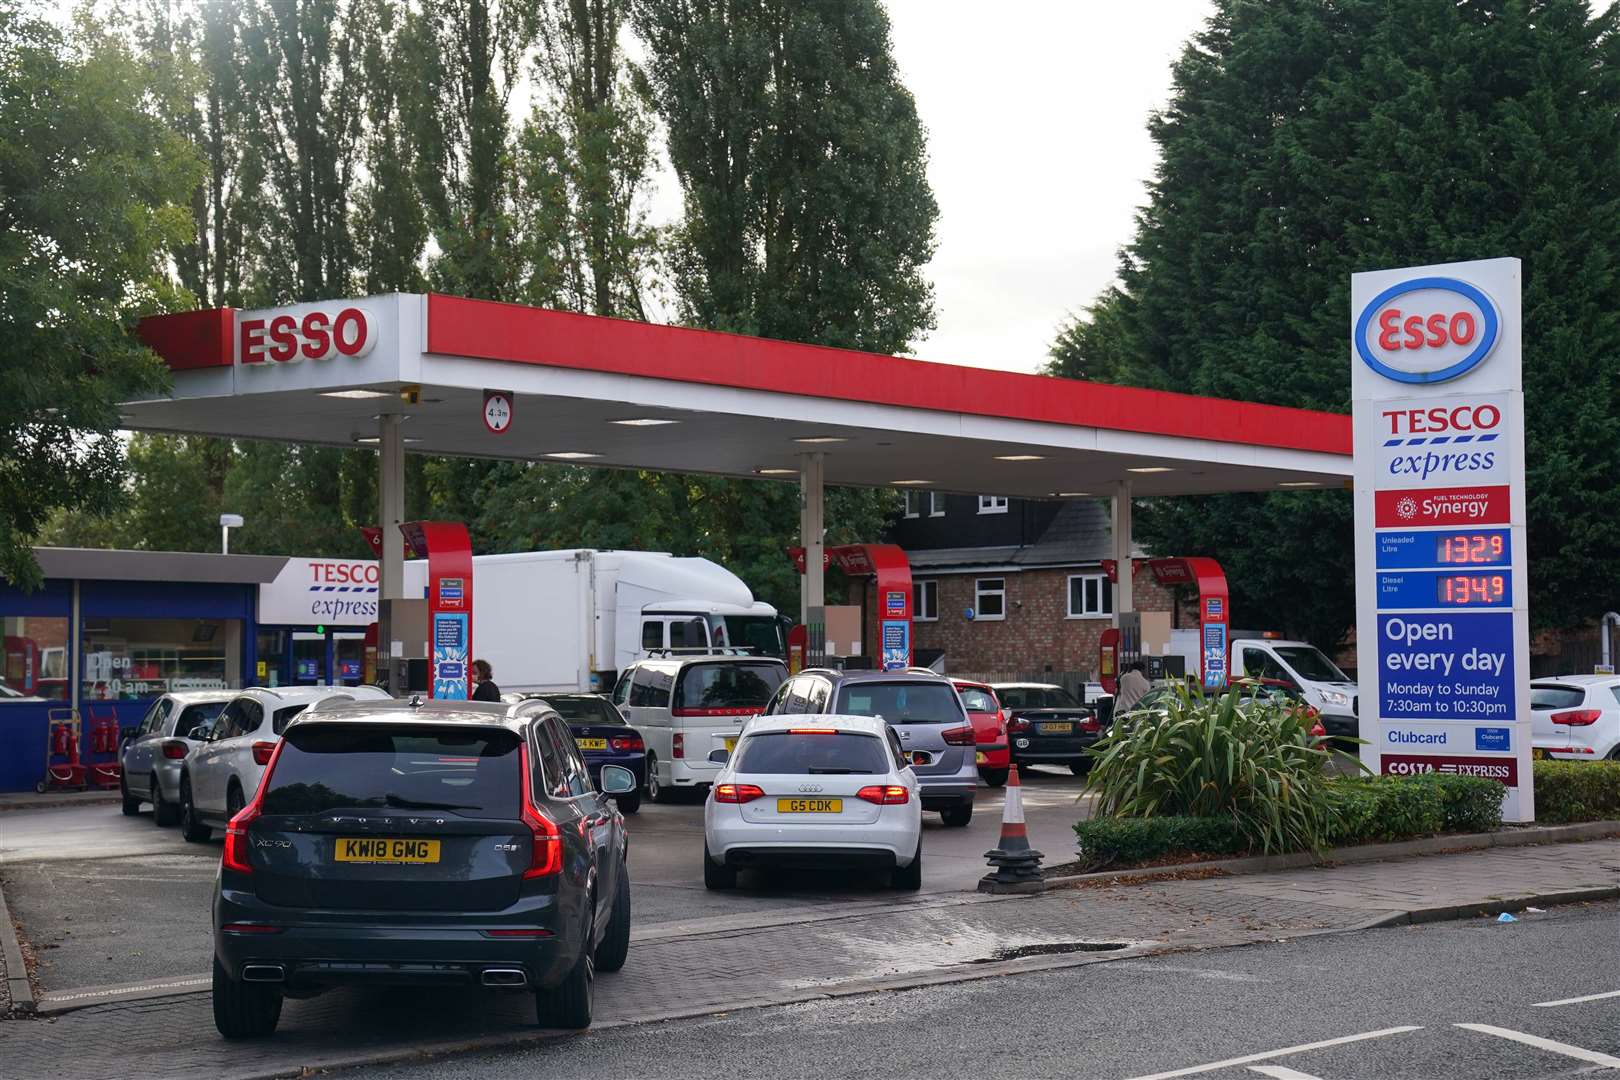 Long queues have continued at petrol stations, despite reports the situation is easing (Jacob King/PA)